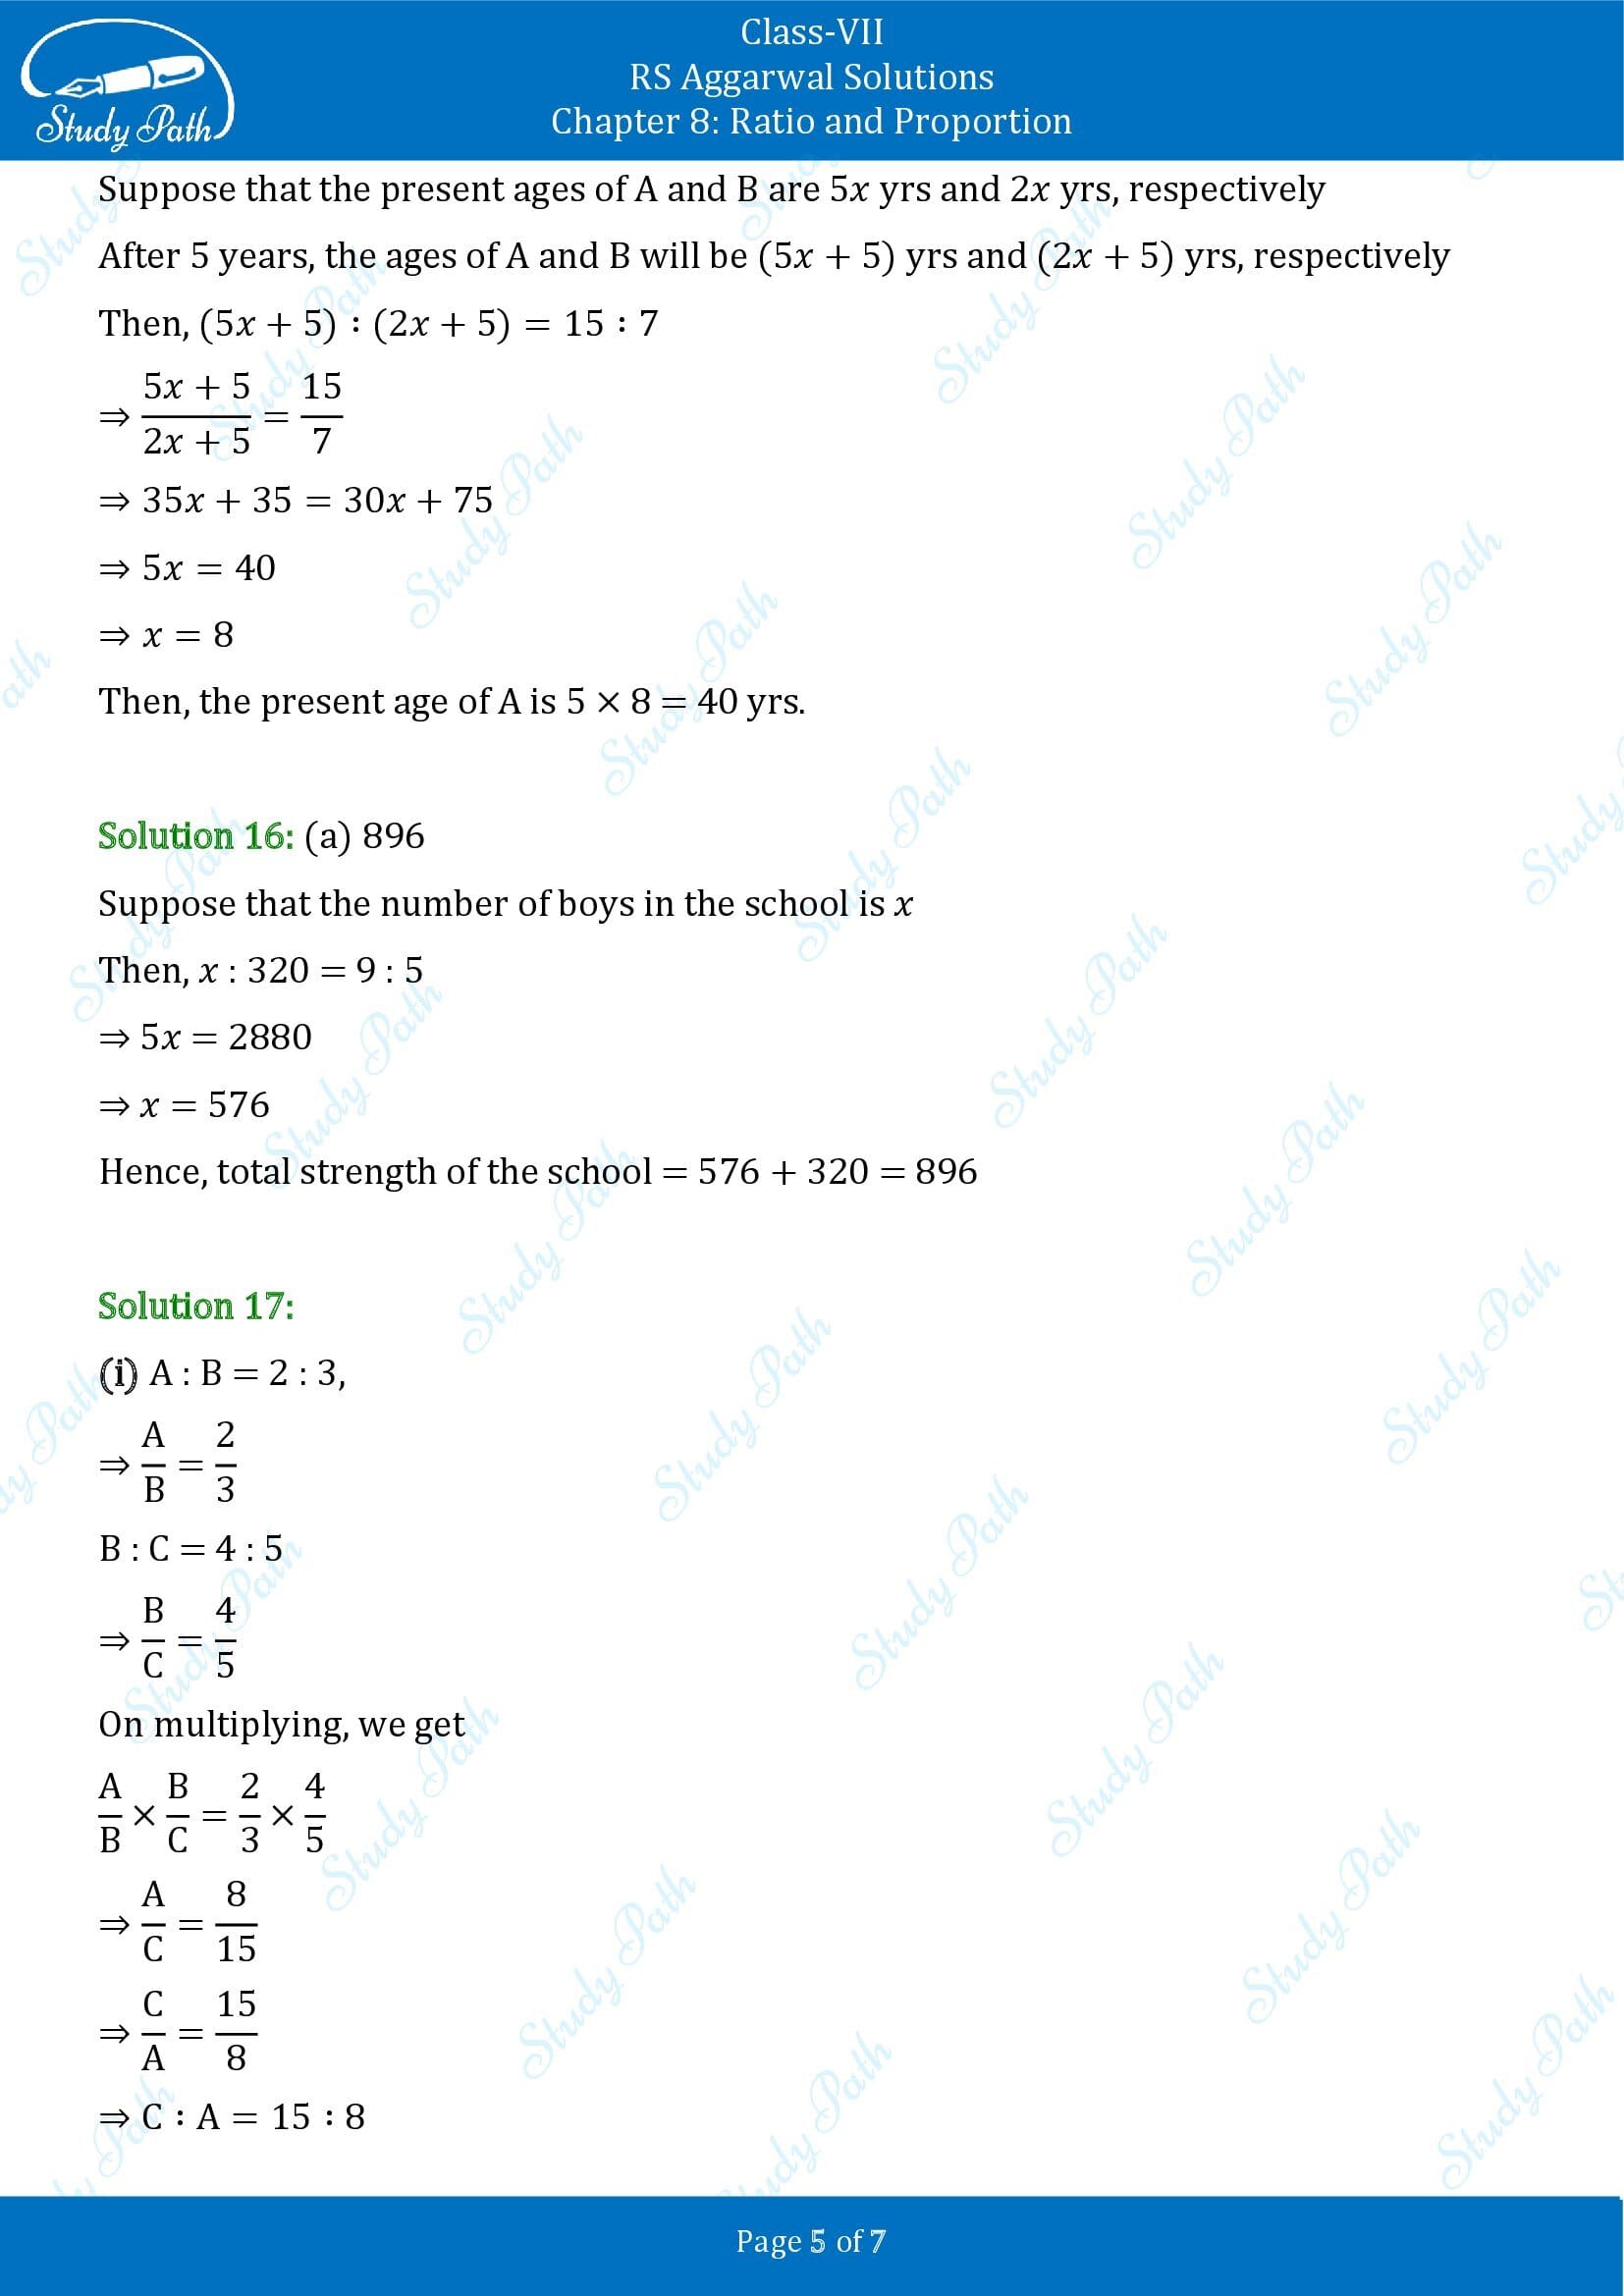 RS Aggarwal Solutions Class 7 Chapter 8 Ratio and Proportion Test Paper 00005